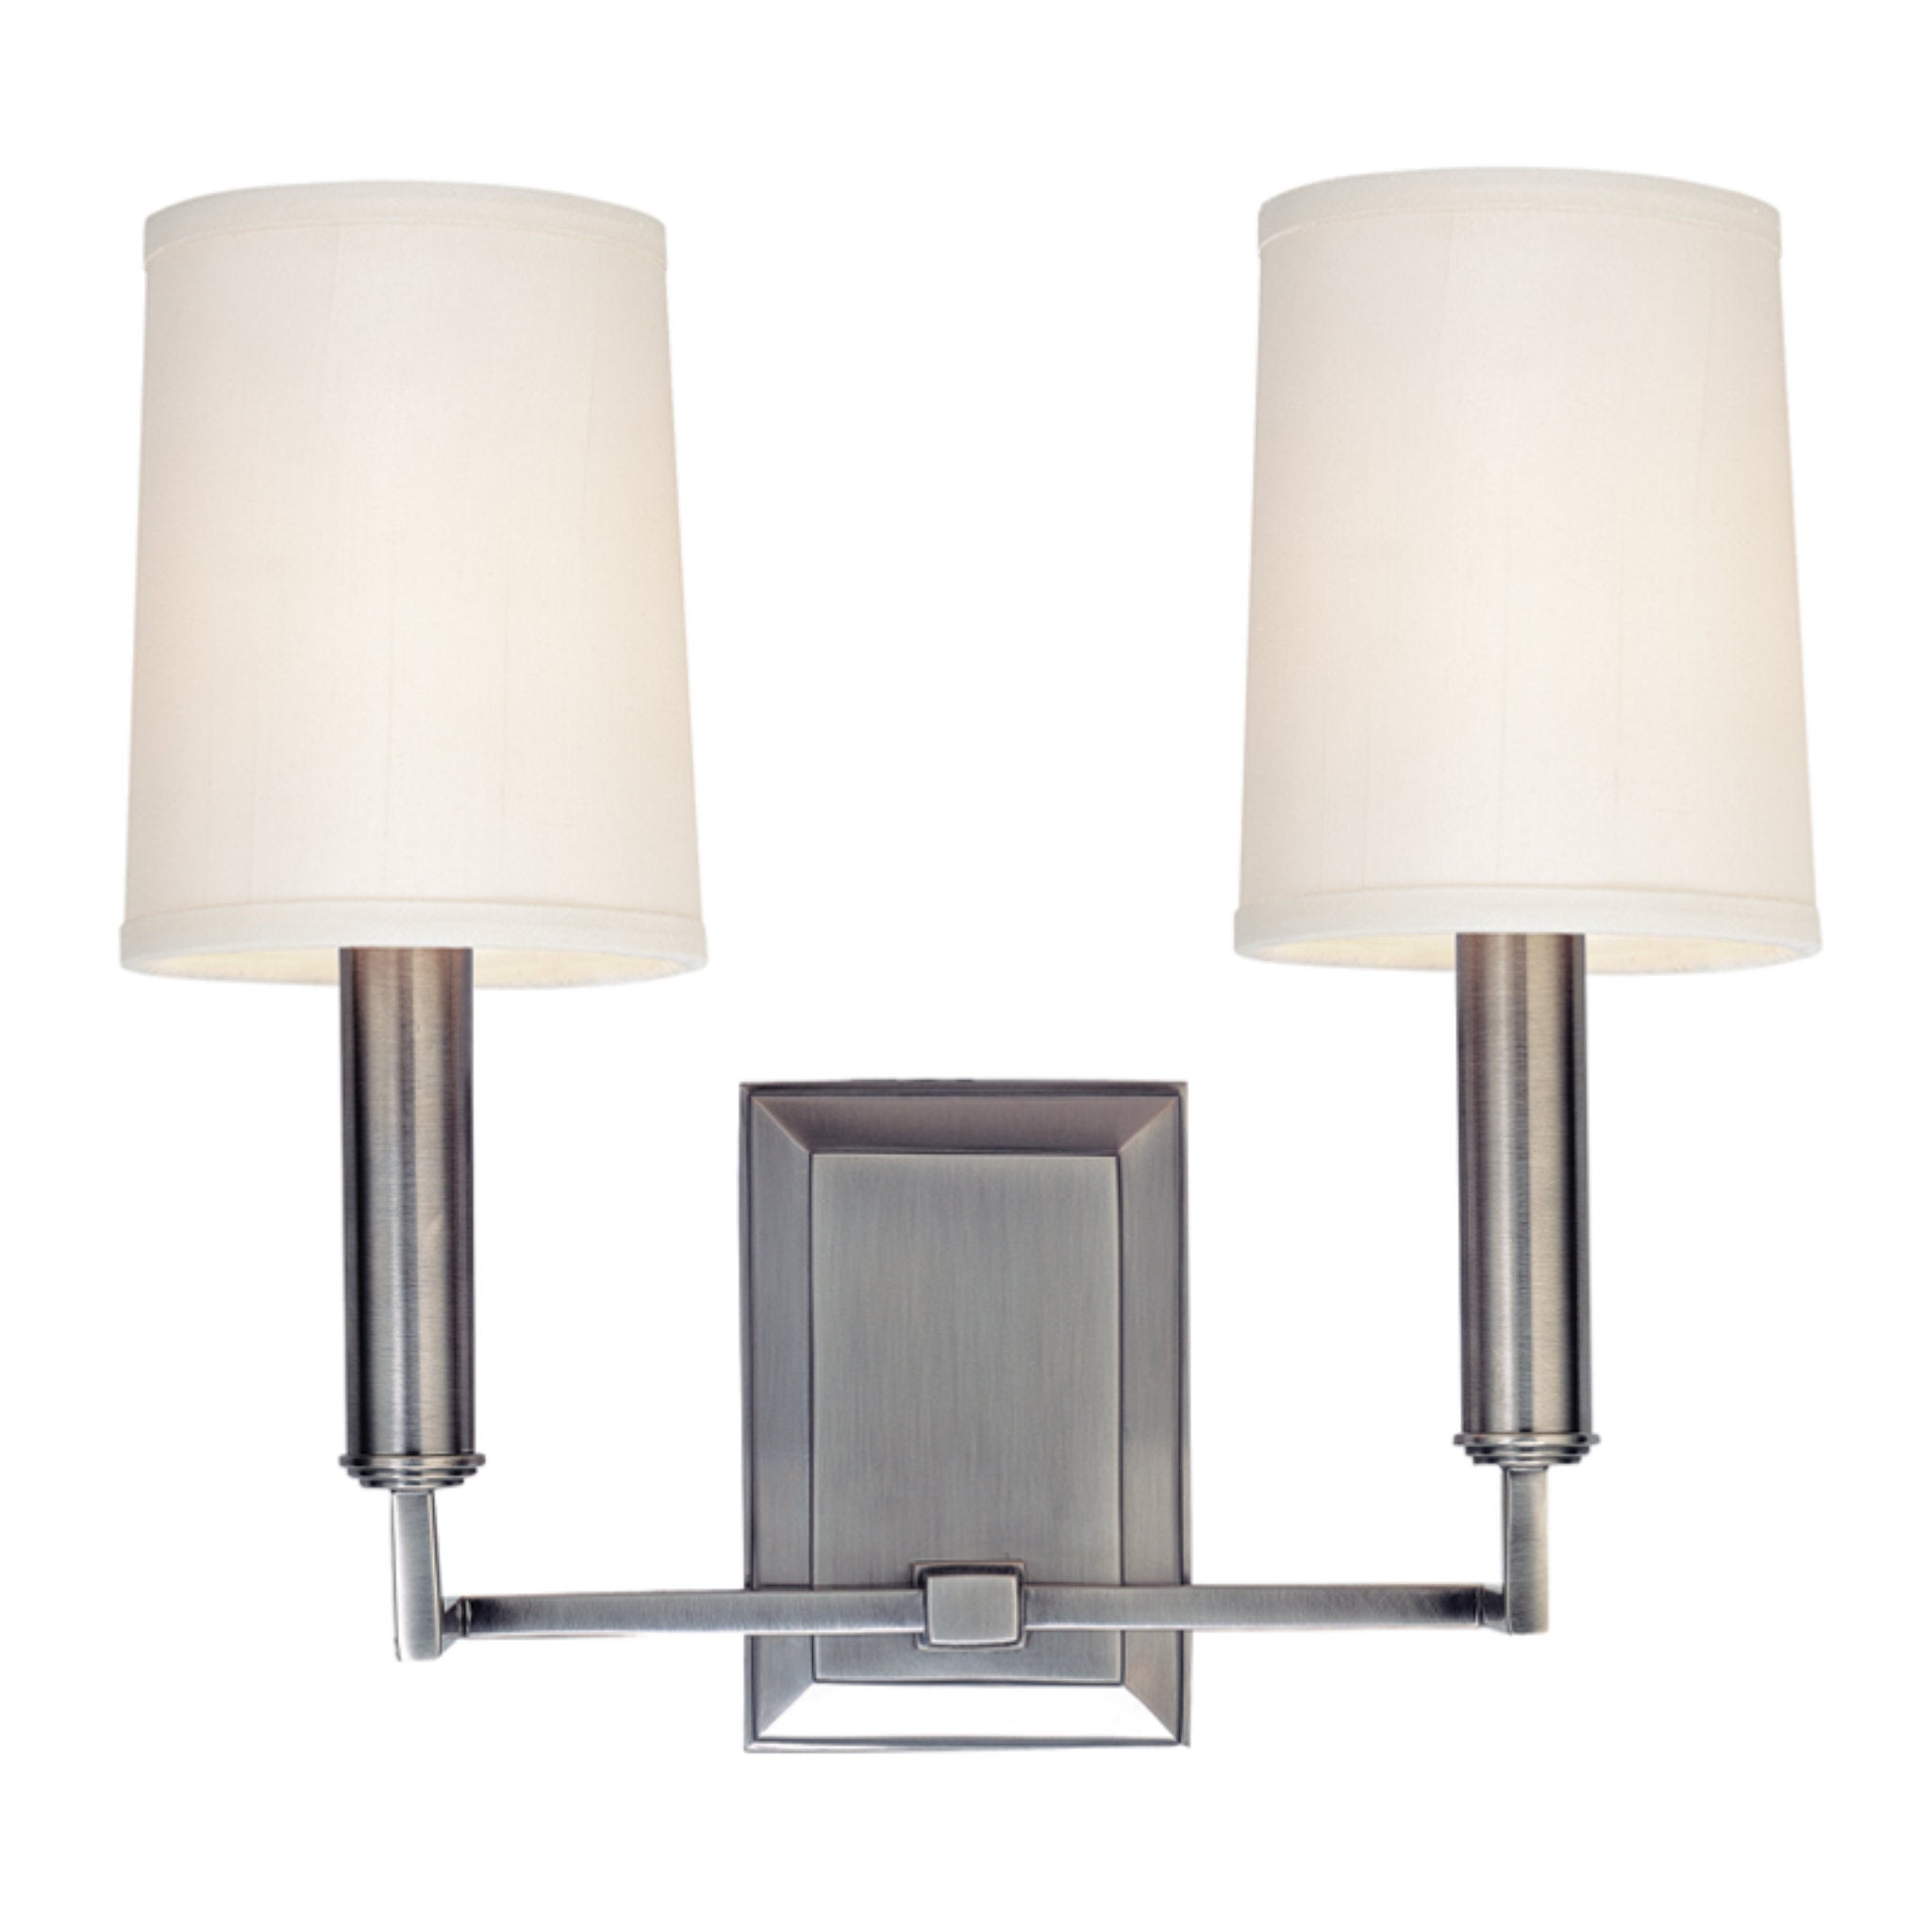 Clinton 2 Light Wall Sconce in Polished Nickel